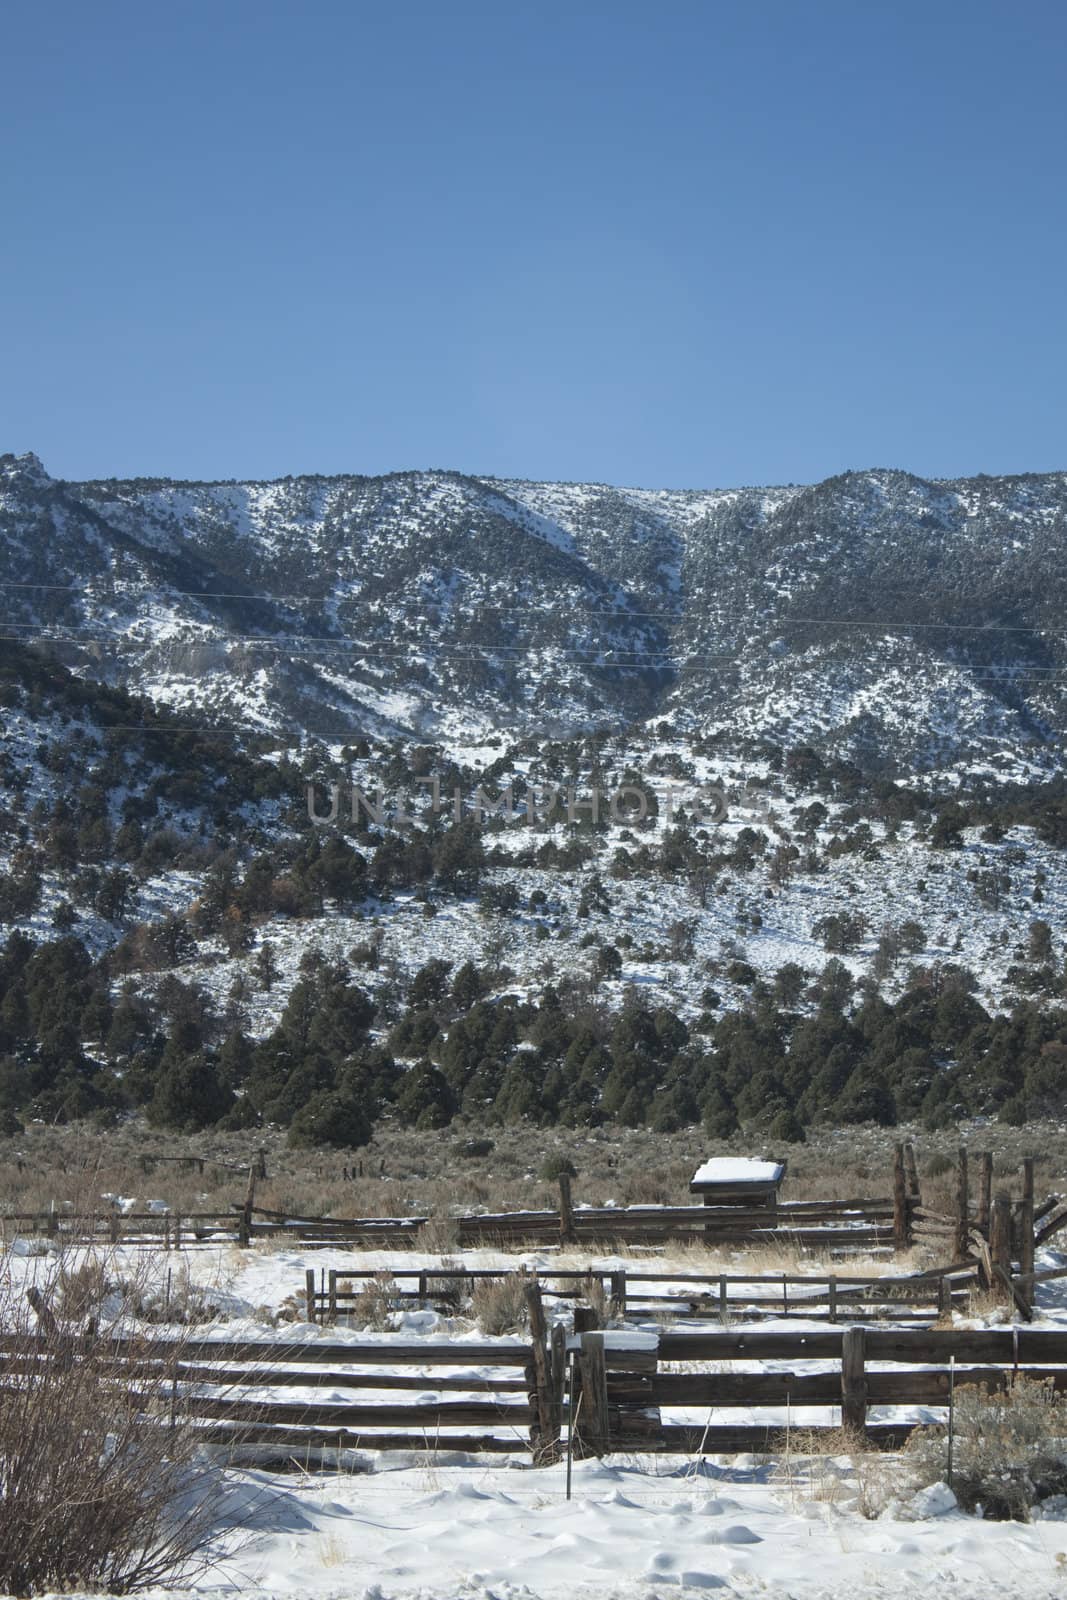 A high desert mountain range with snow on it.farm country